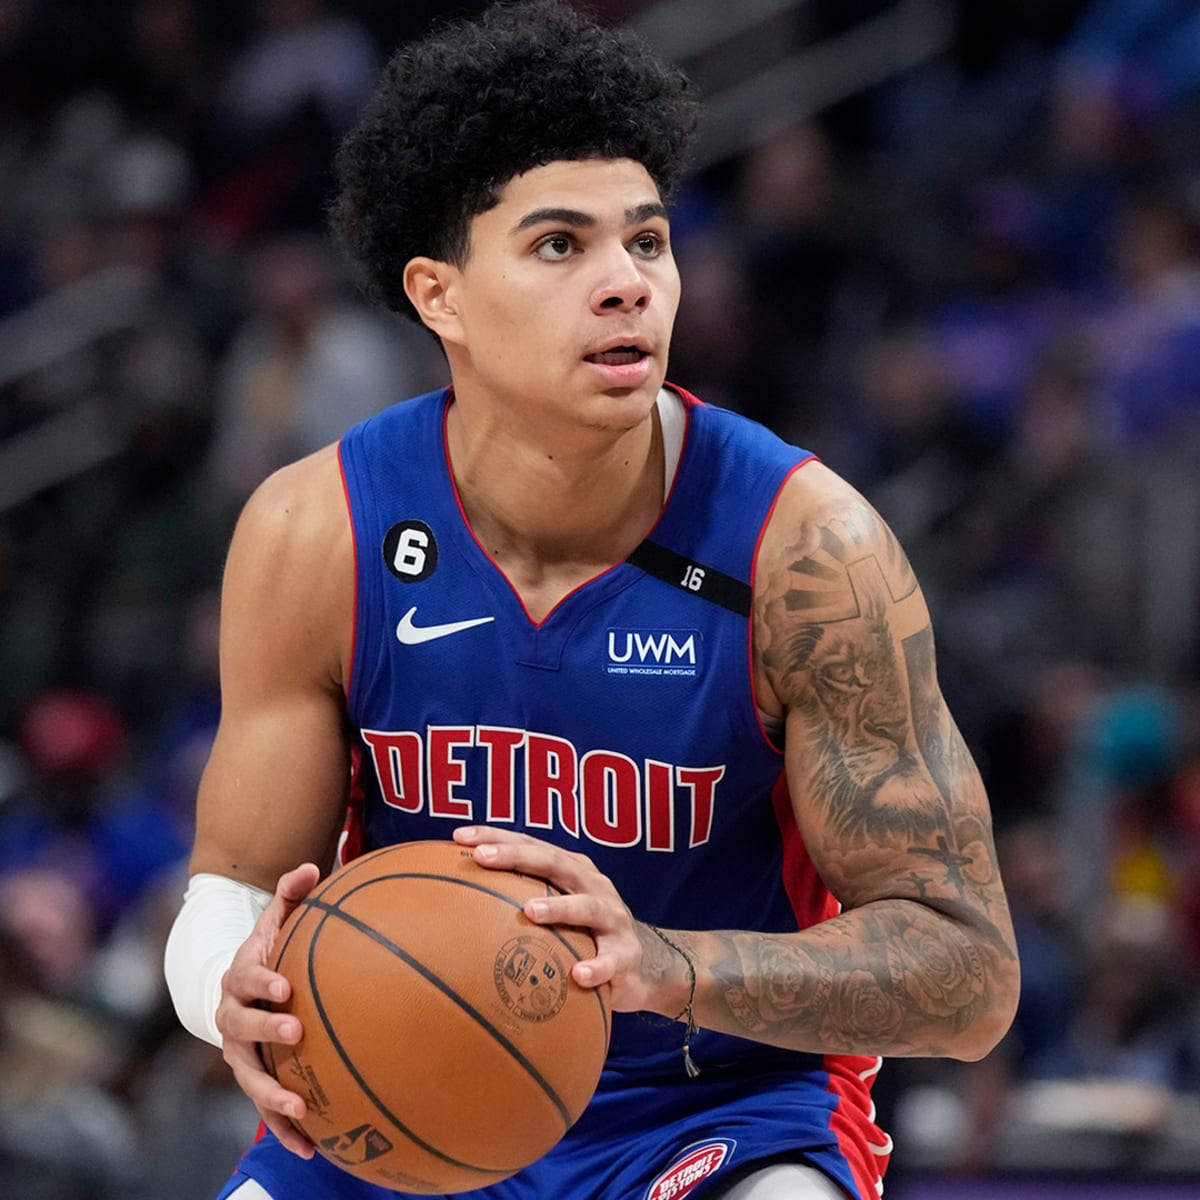 Watch Phoenix Suns at Detroit Pistons Stream NBA live, TV channel - How to Watch and Stream Major League and College Sports